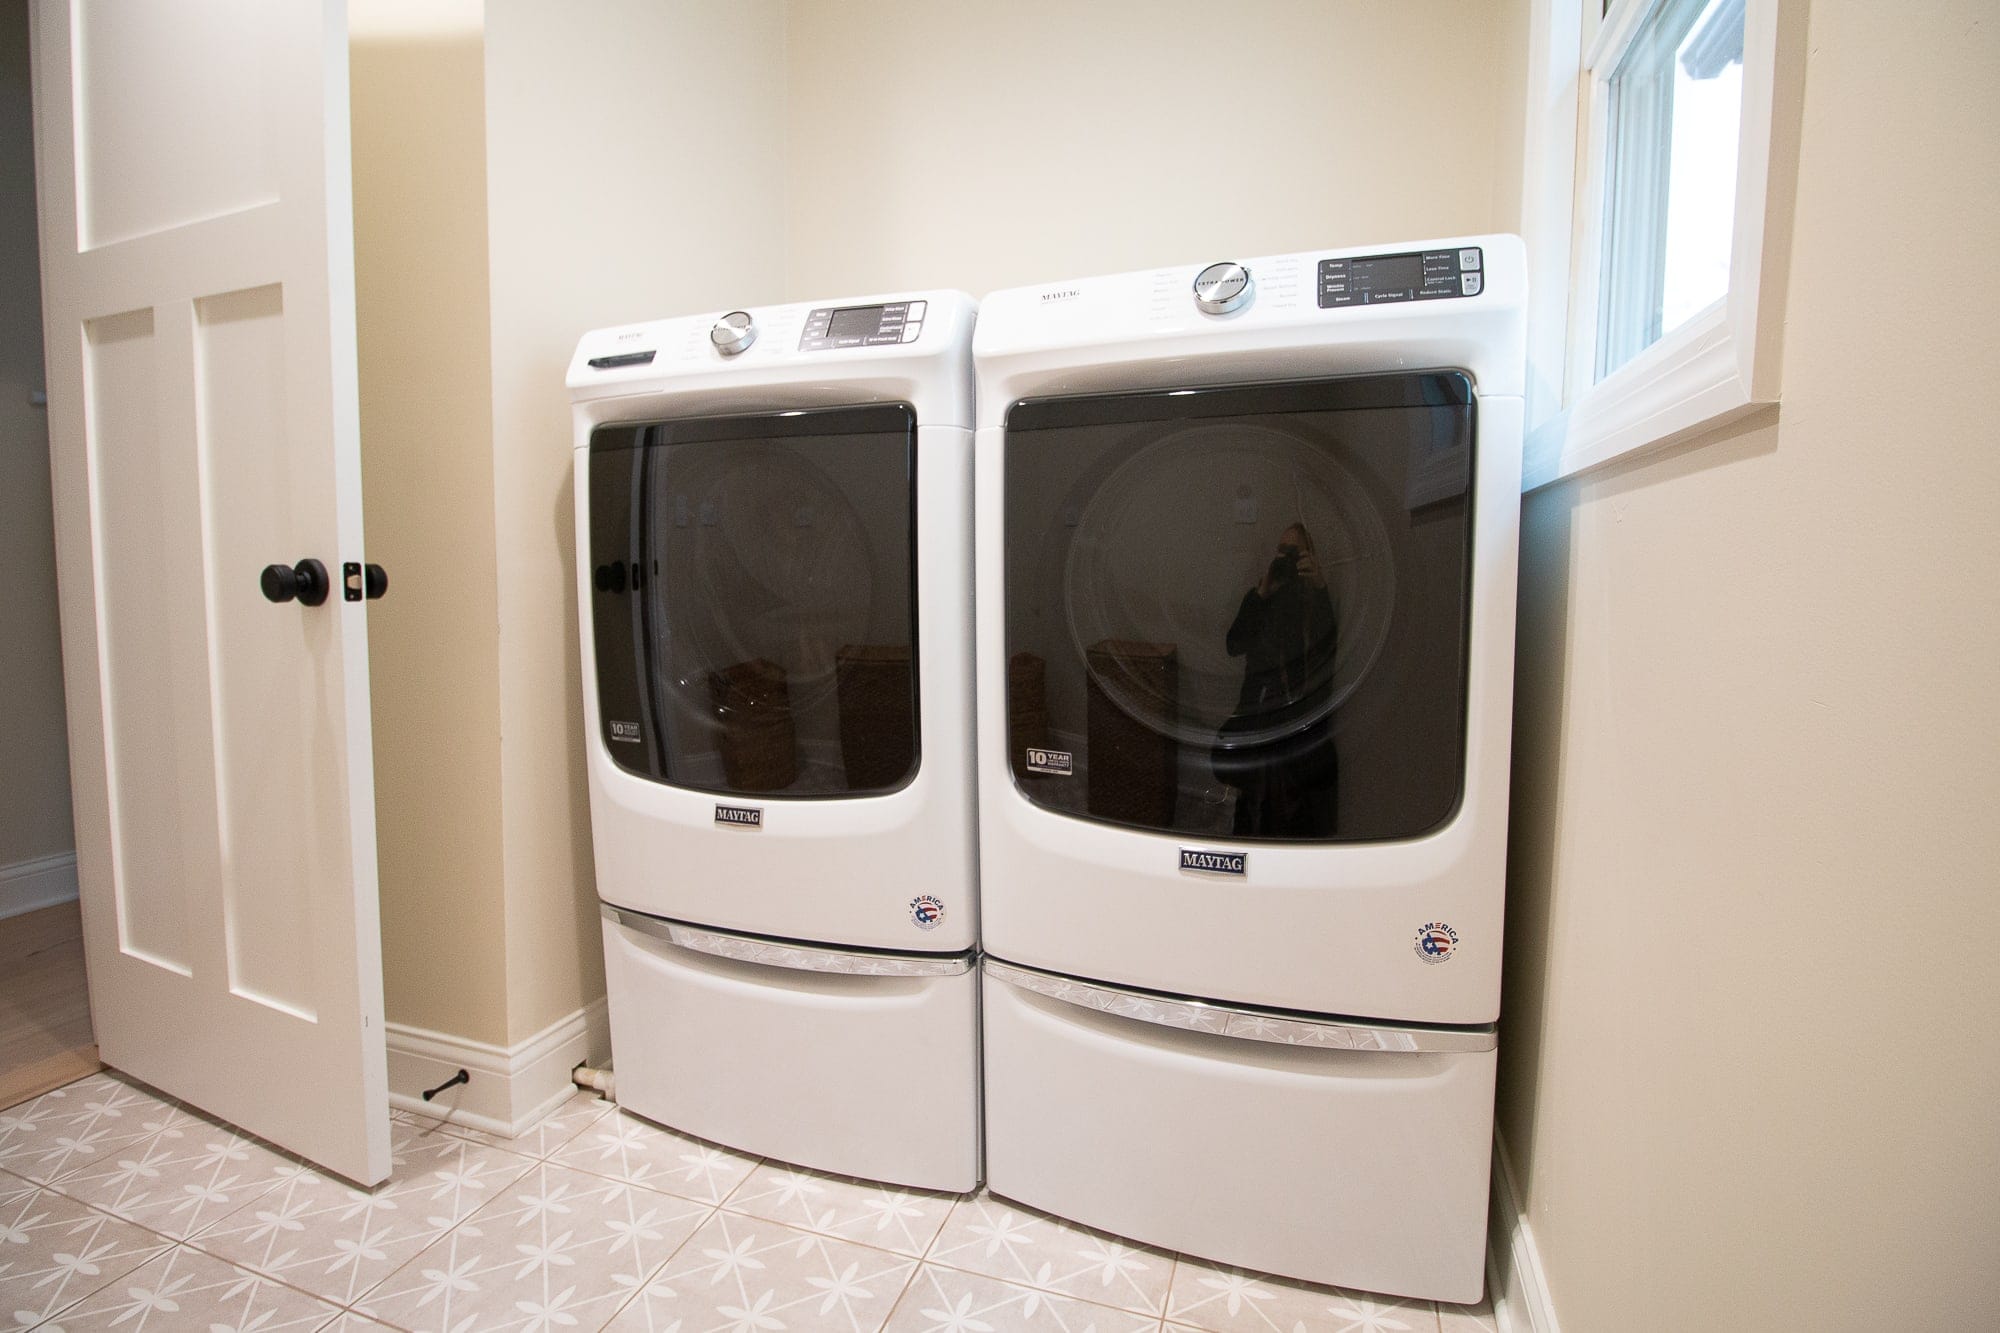 Our DIY laundry room gameplan